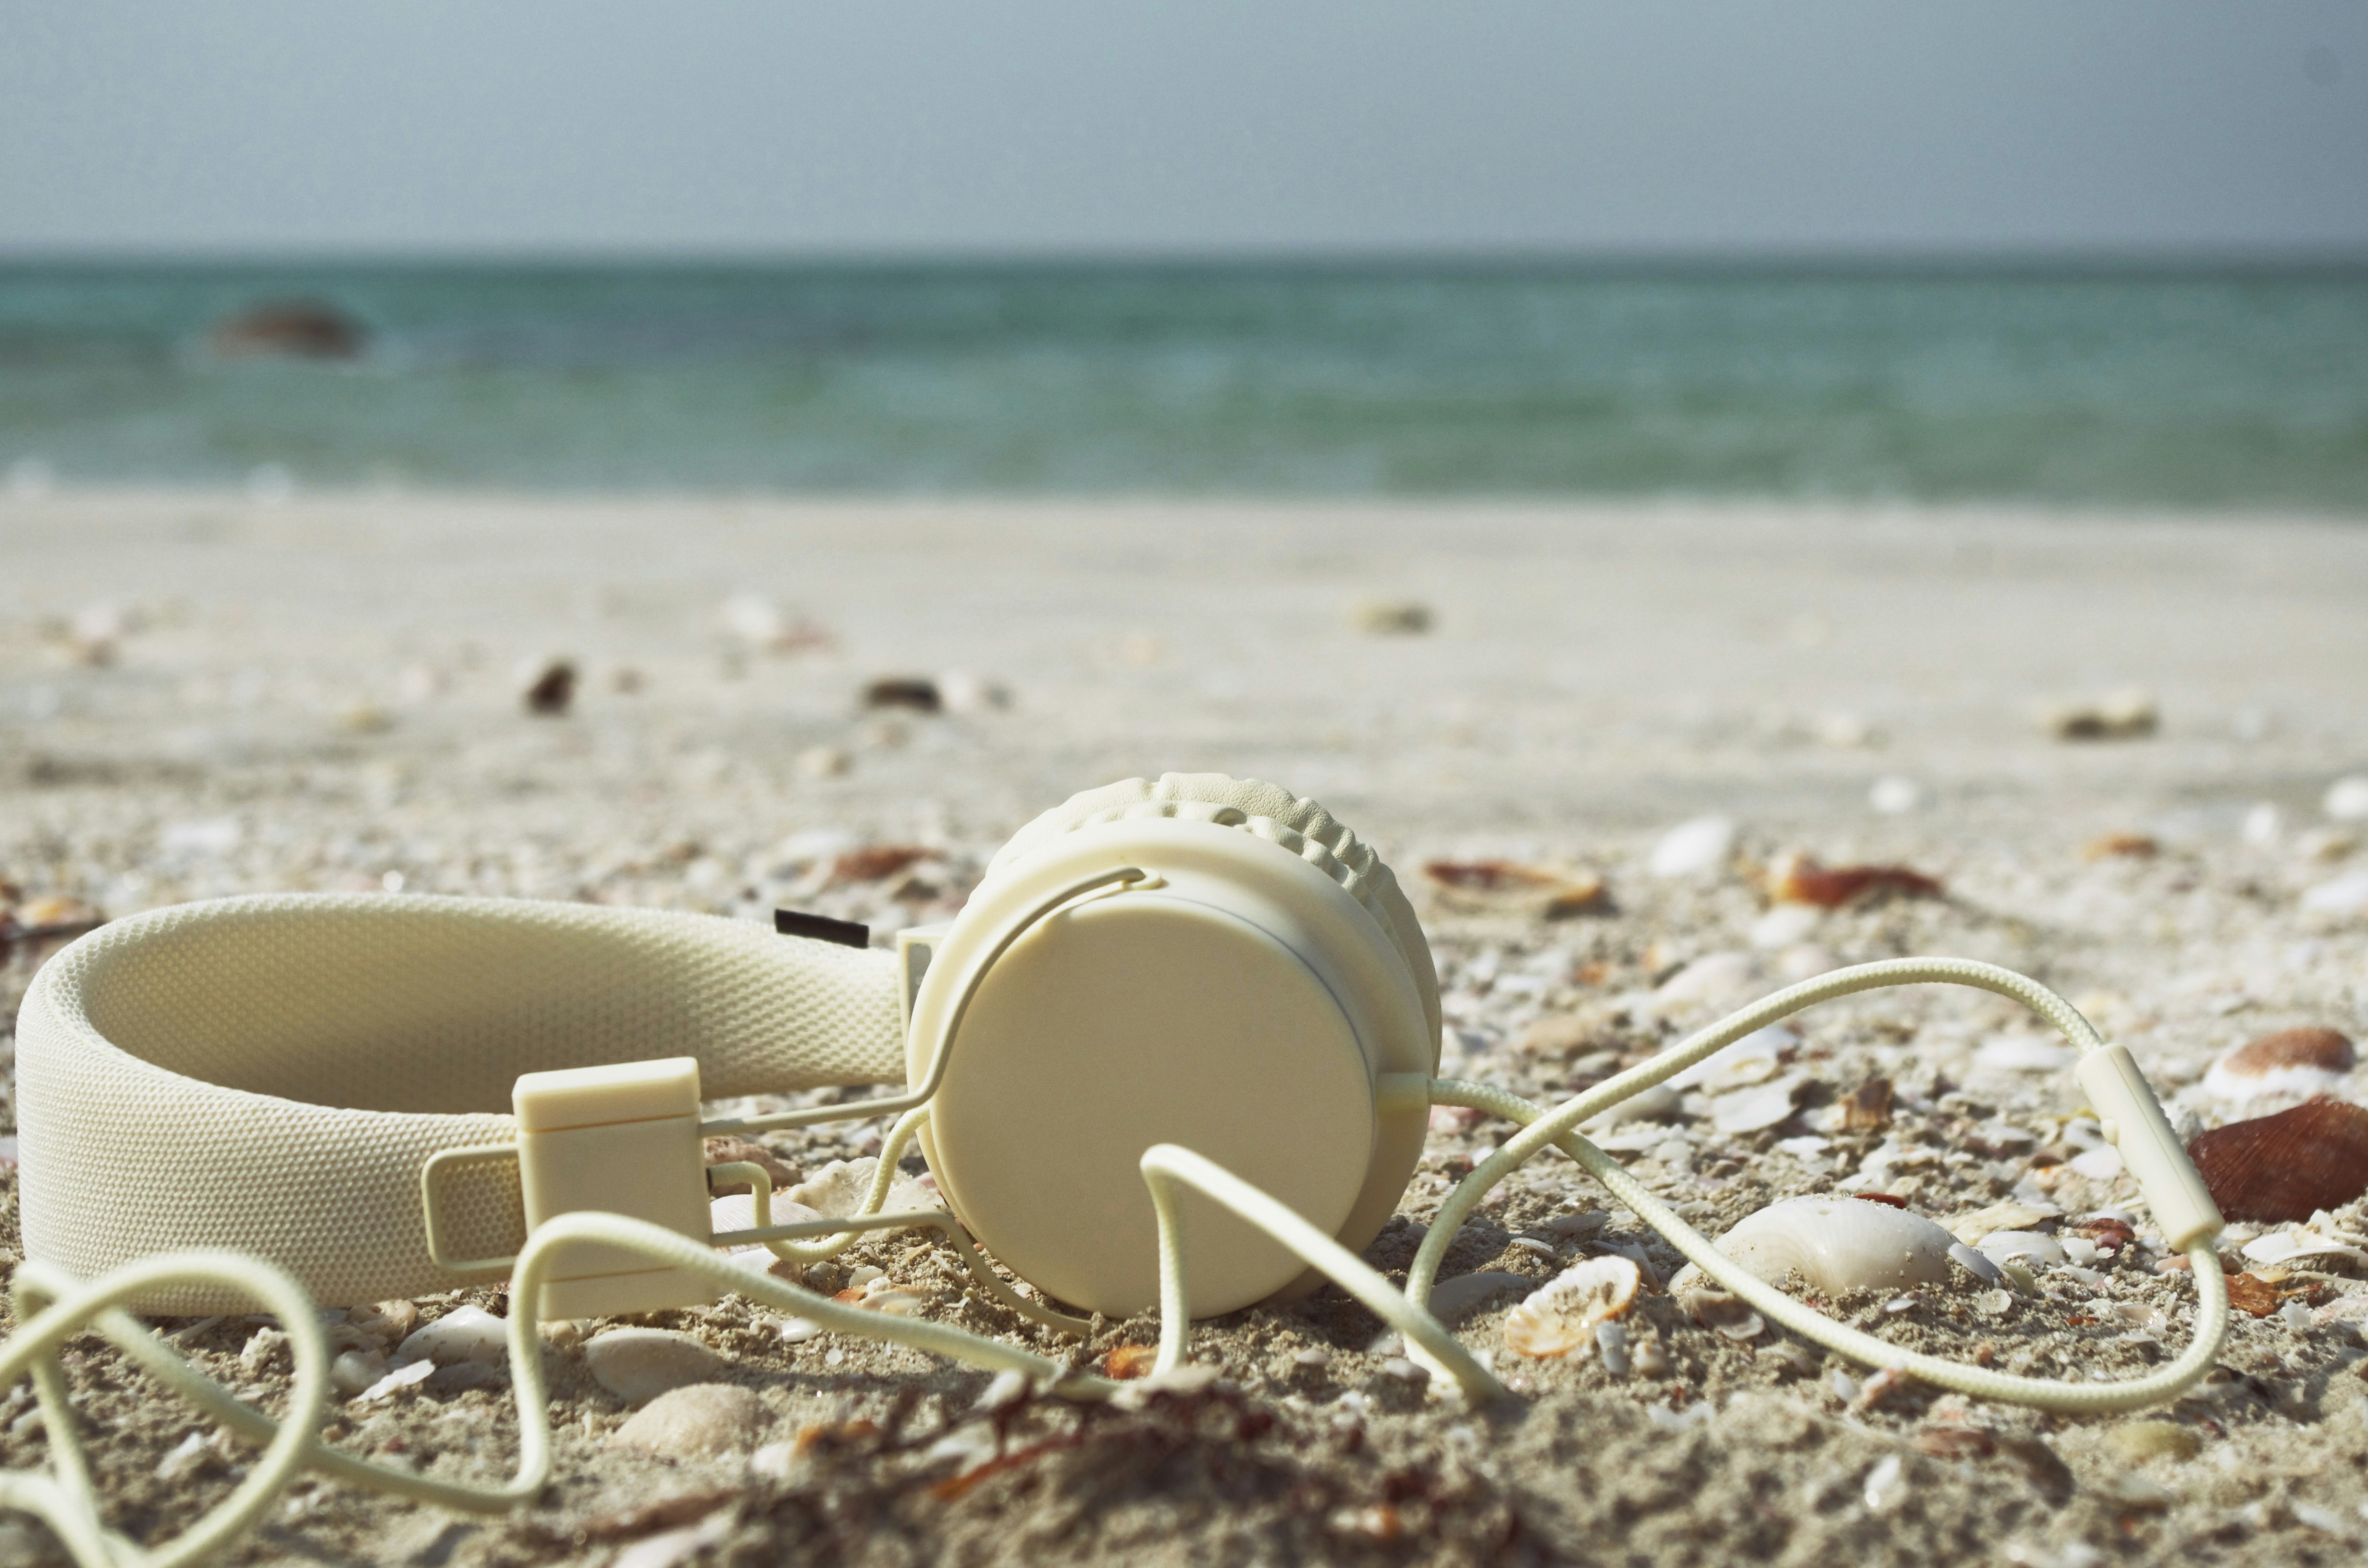 white plastic cup on white sand beach during daytime